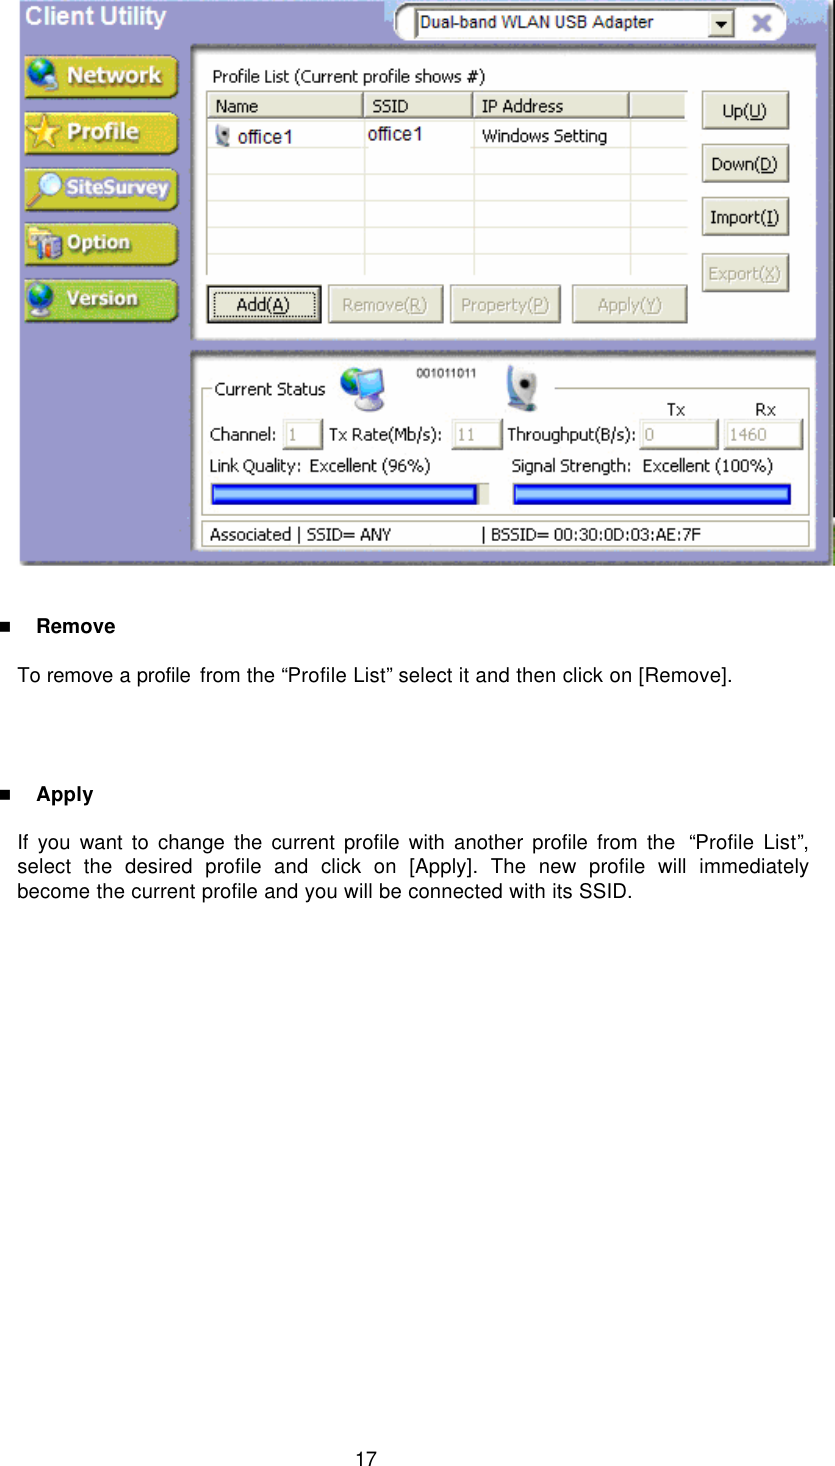  17    n Remove  To remove a profile from the “Profile List” select it and then click on [Remove].     n Apply  If you want to change the current profile with another profile from the  “Profile List”, select the desired profile and click on [Apply]. The new profile will immediately become the current profile and you will be connected with its SSID.   